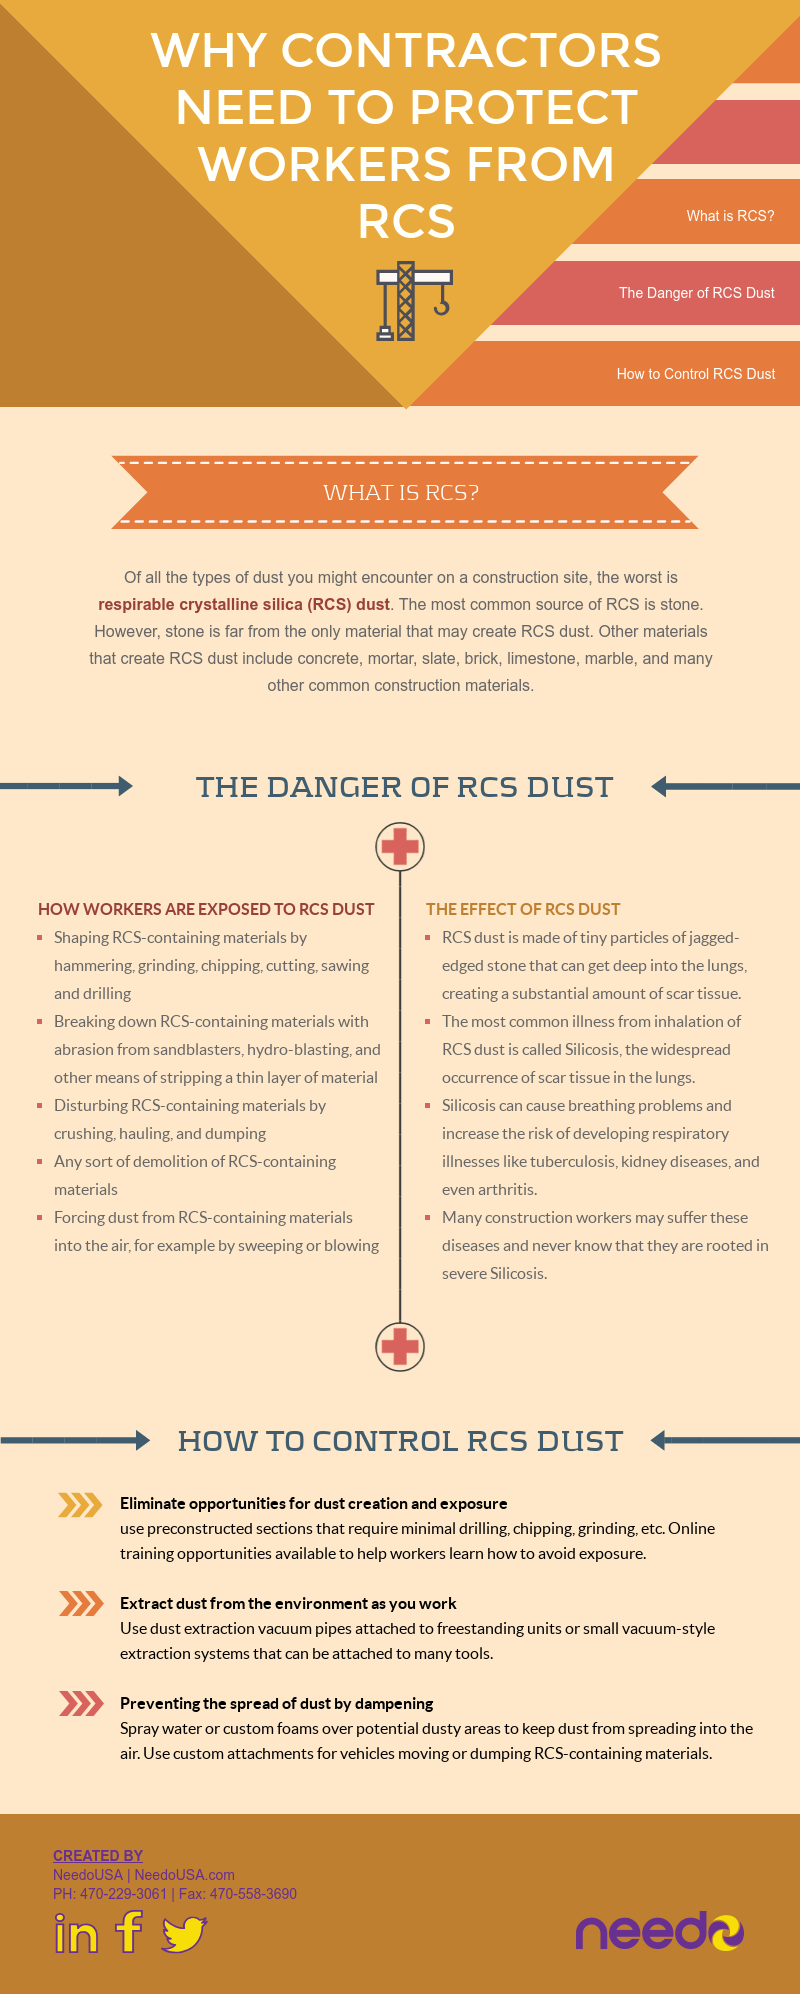 Why Contractors Need to Protect Workers from RCS [infographic]